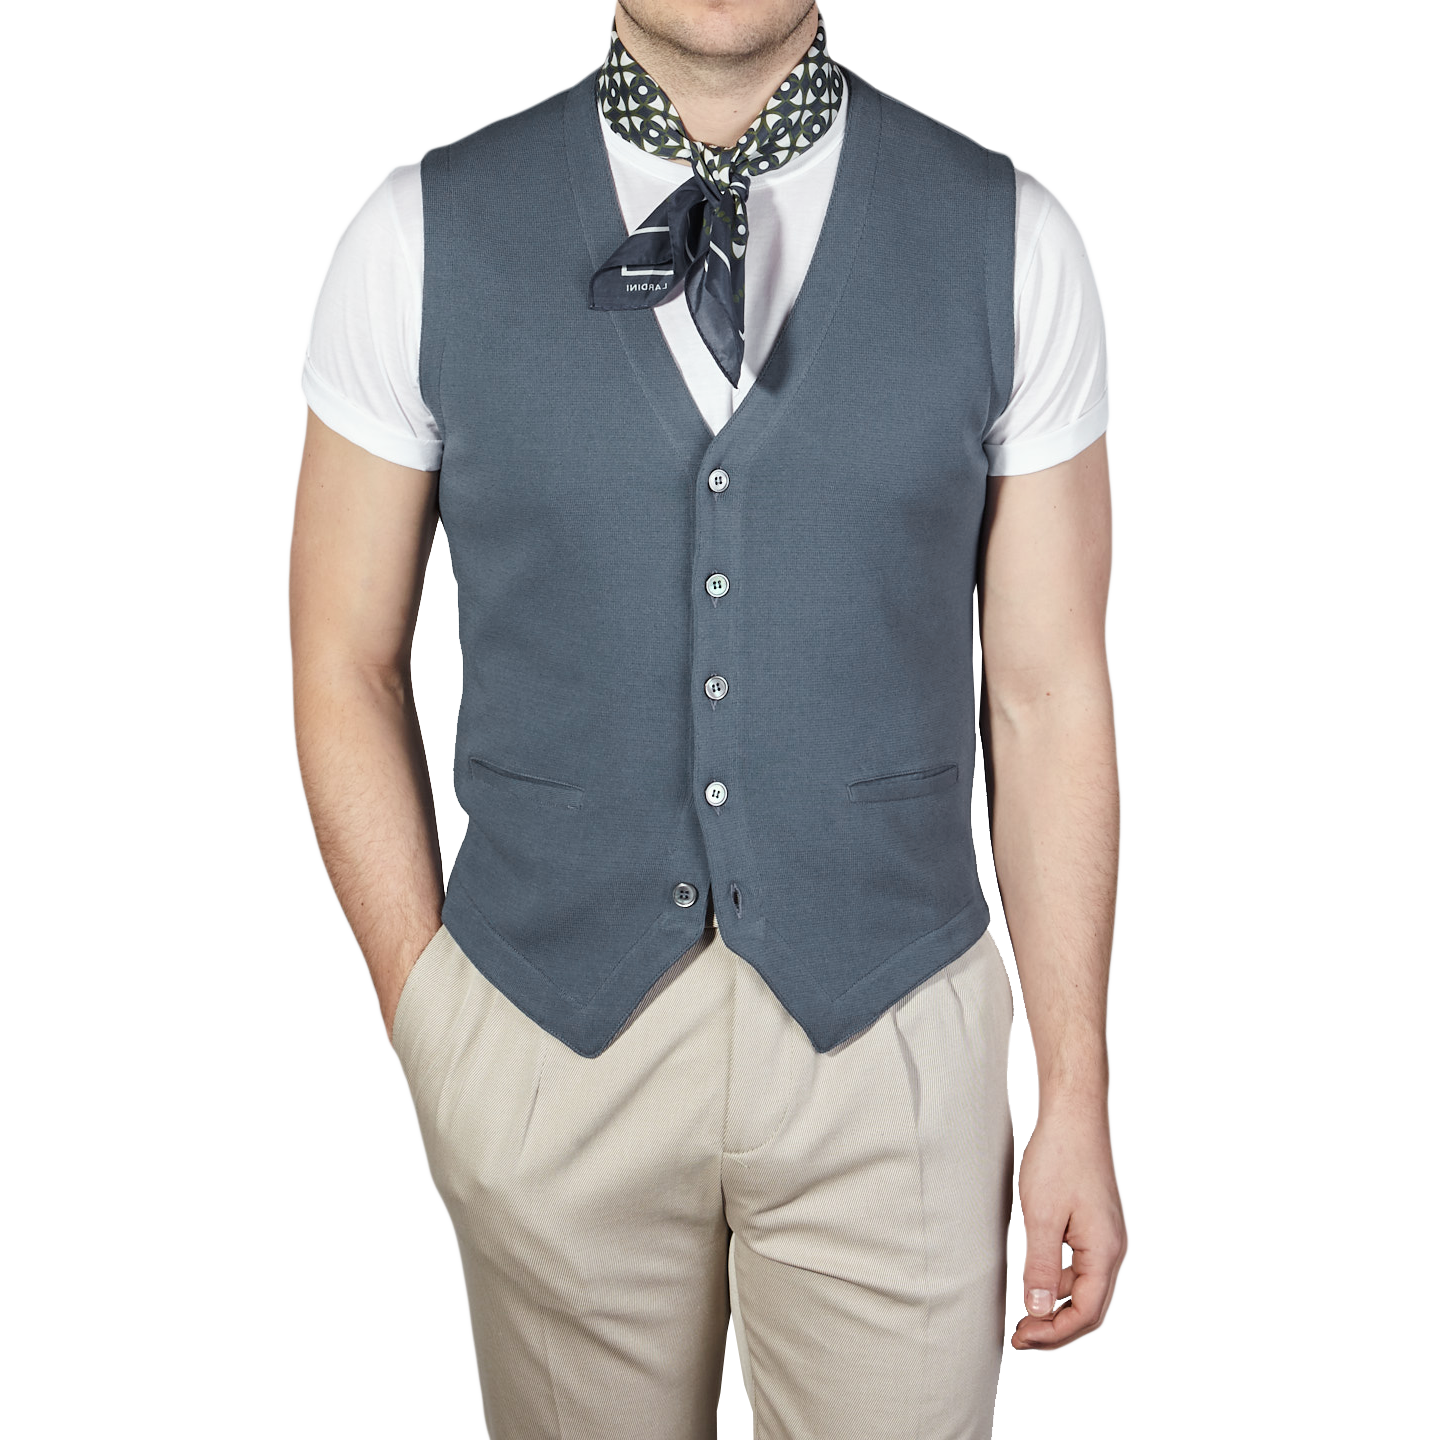 How to wear tailored vests  HOWTOWEAR Fashion